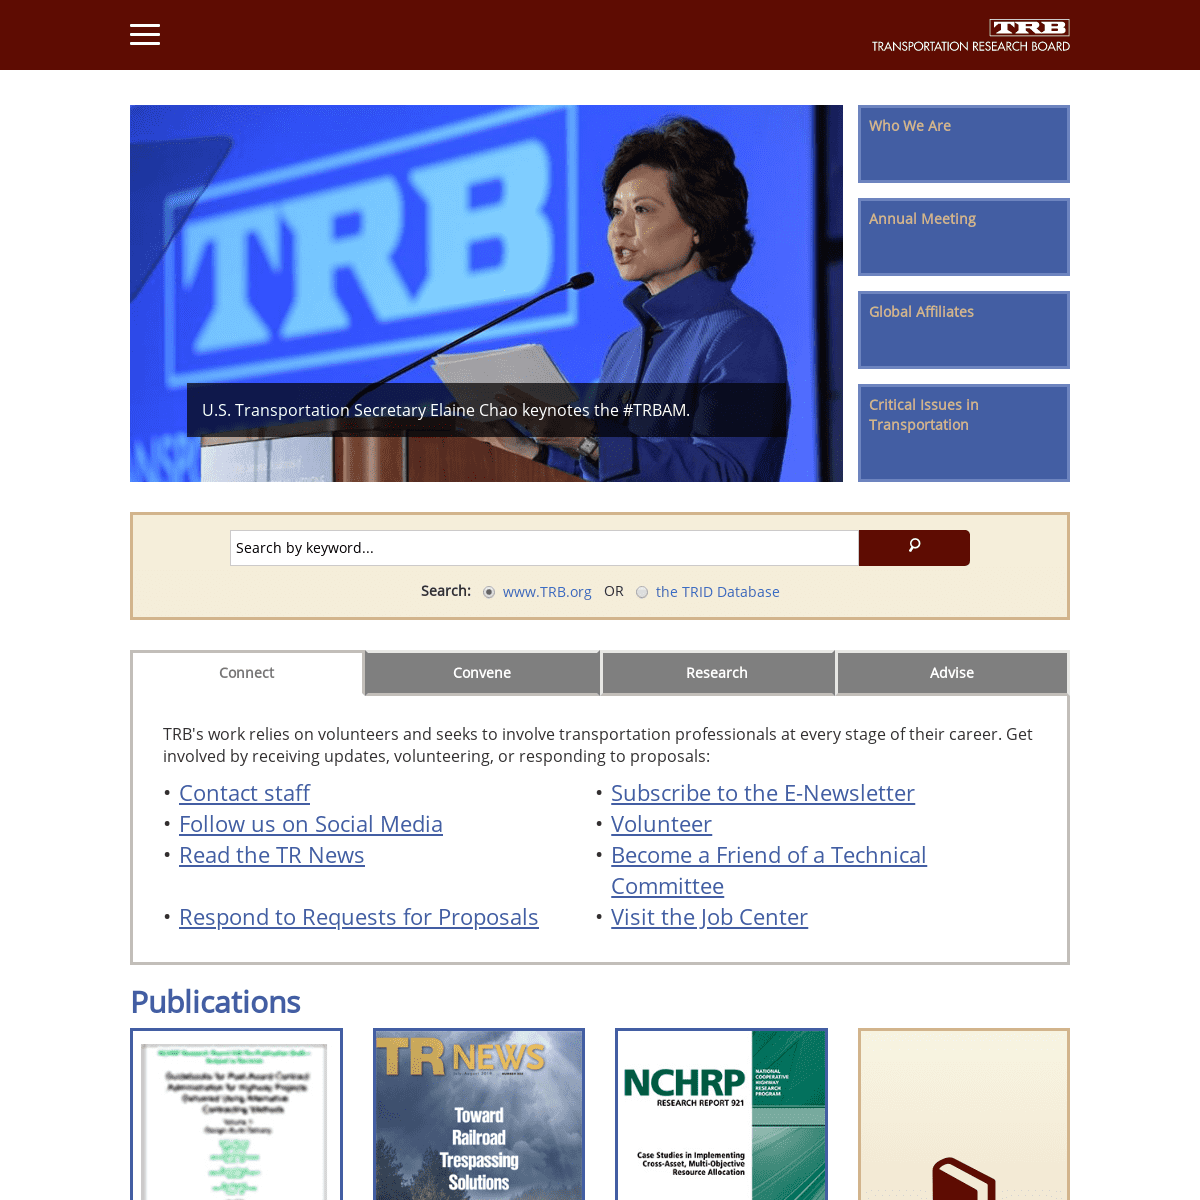 A complete backup of trb.org